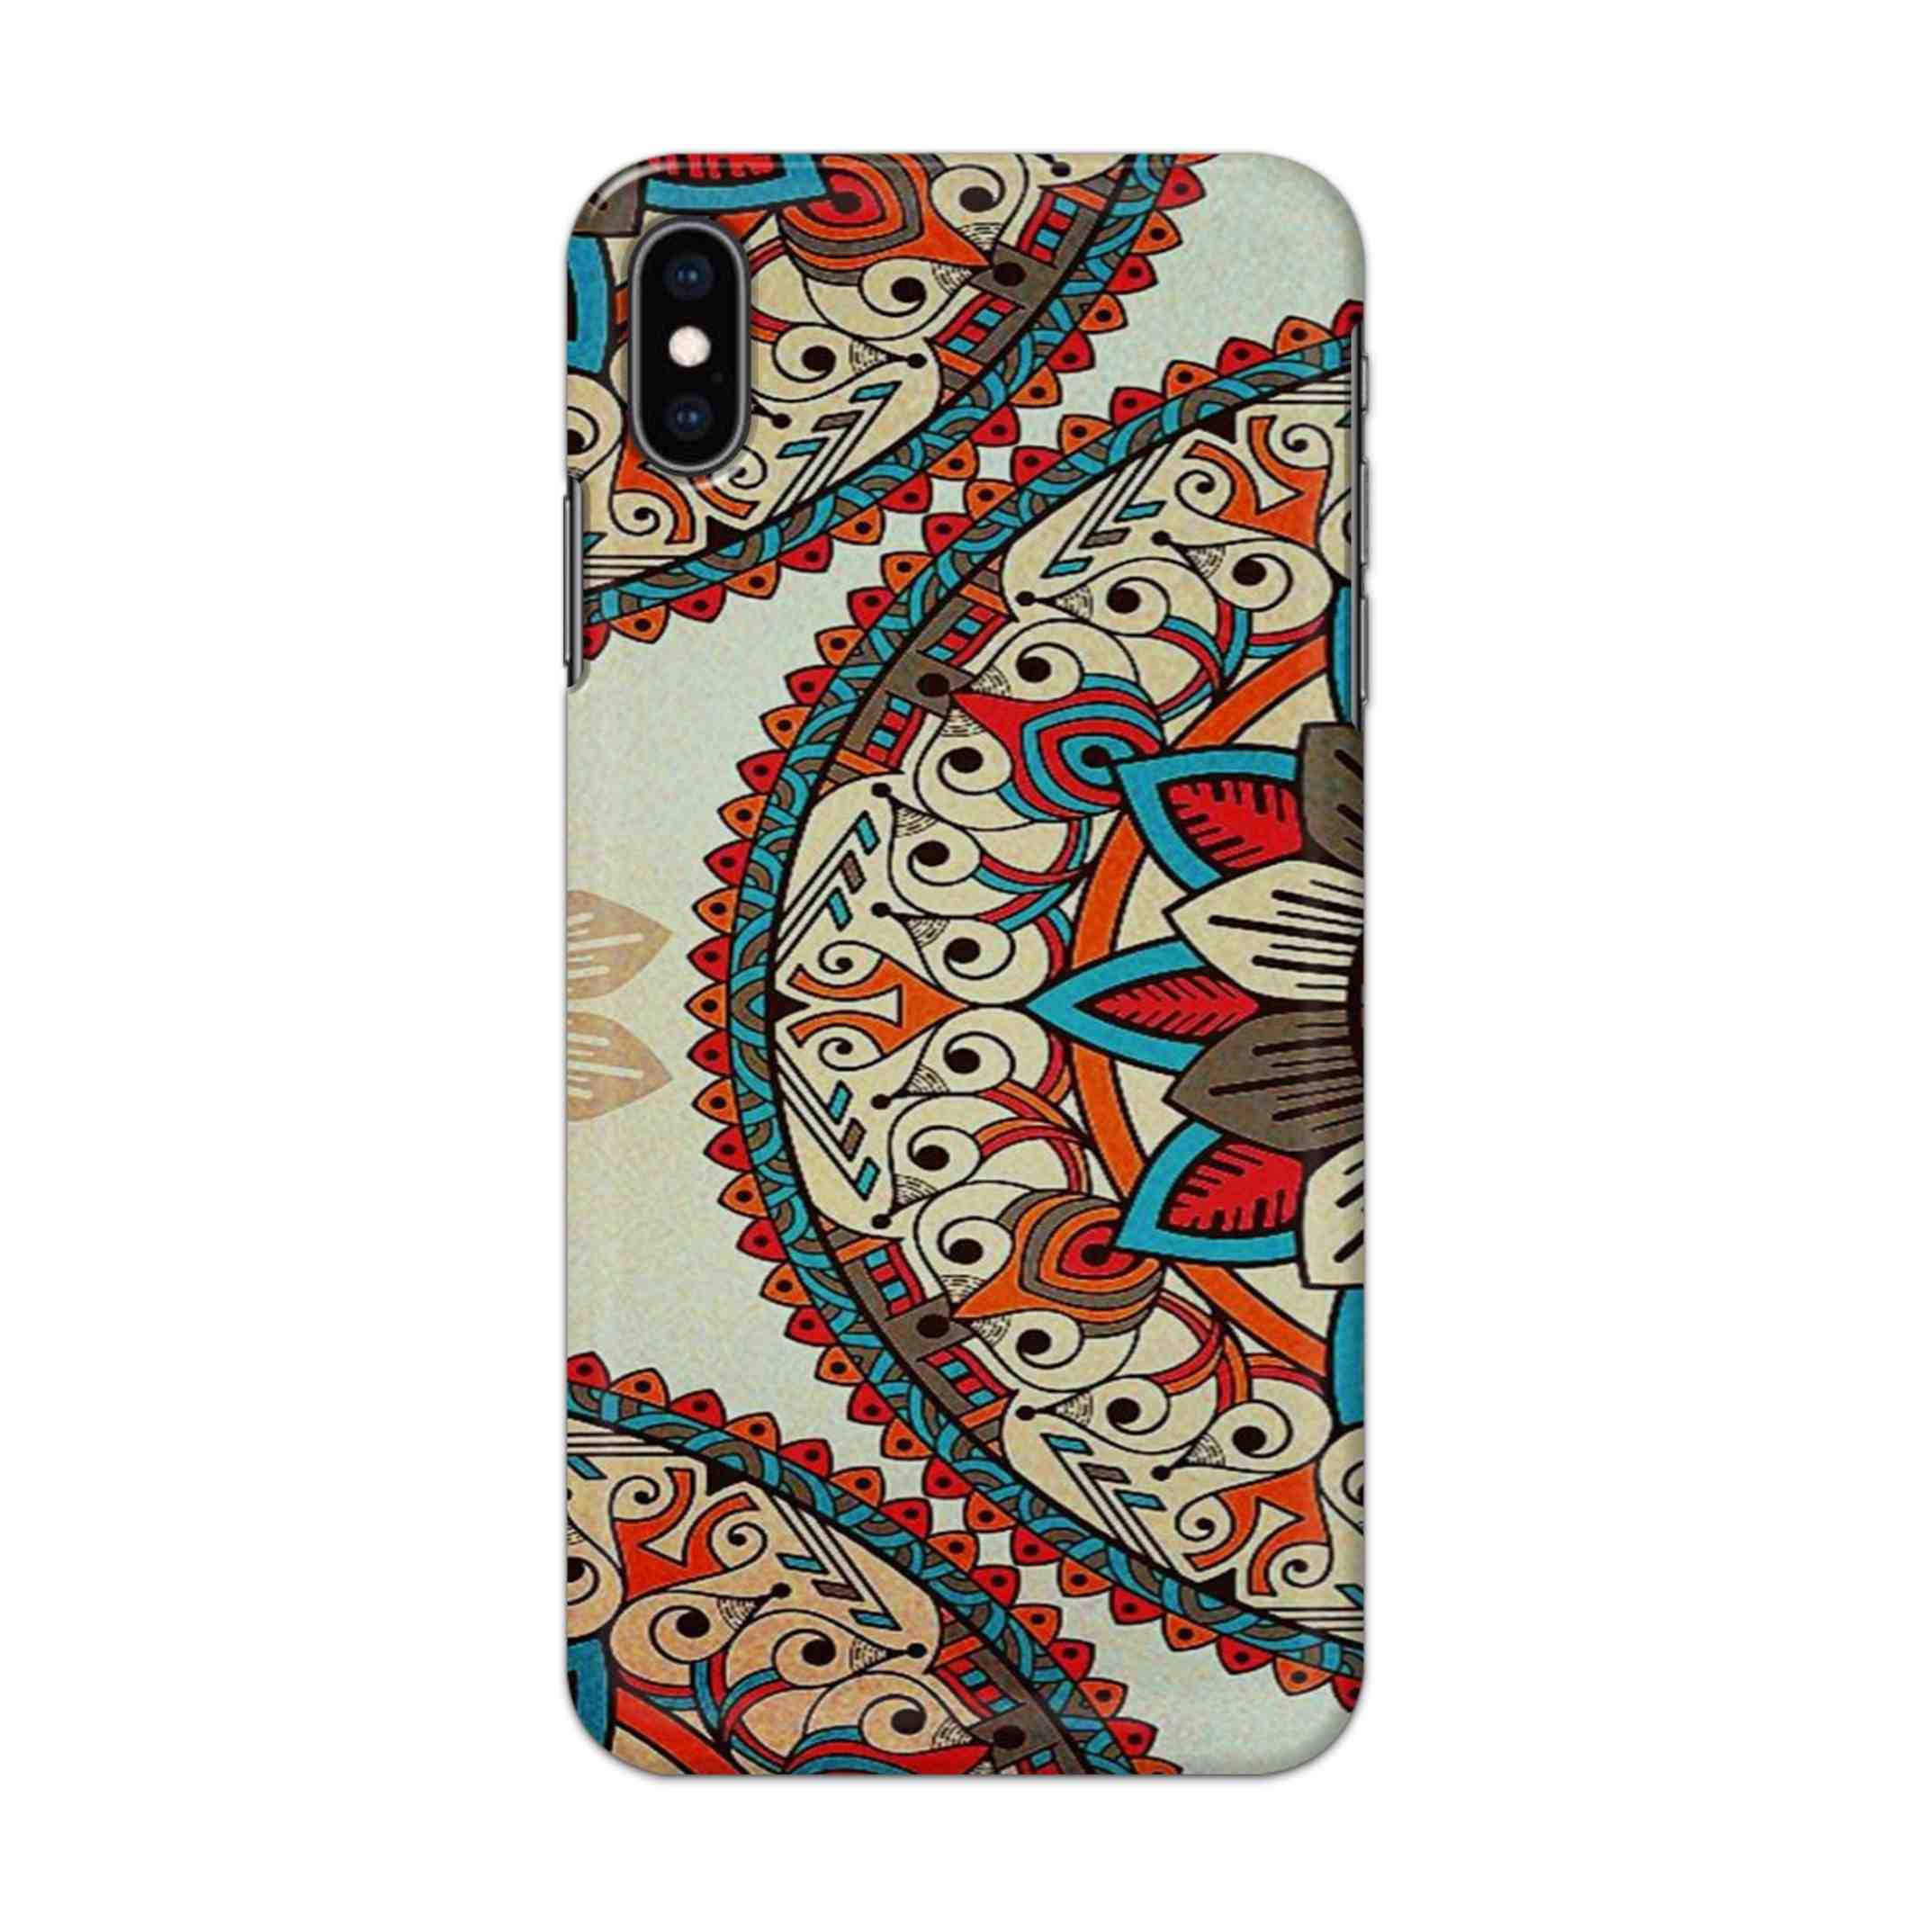 Buy Aztec Mandalas Hard Back Mobile Phone Case/Cover For iPhone XS MAX Online